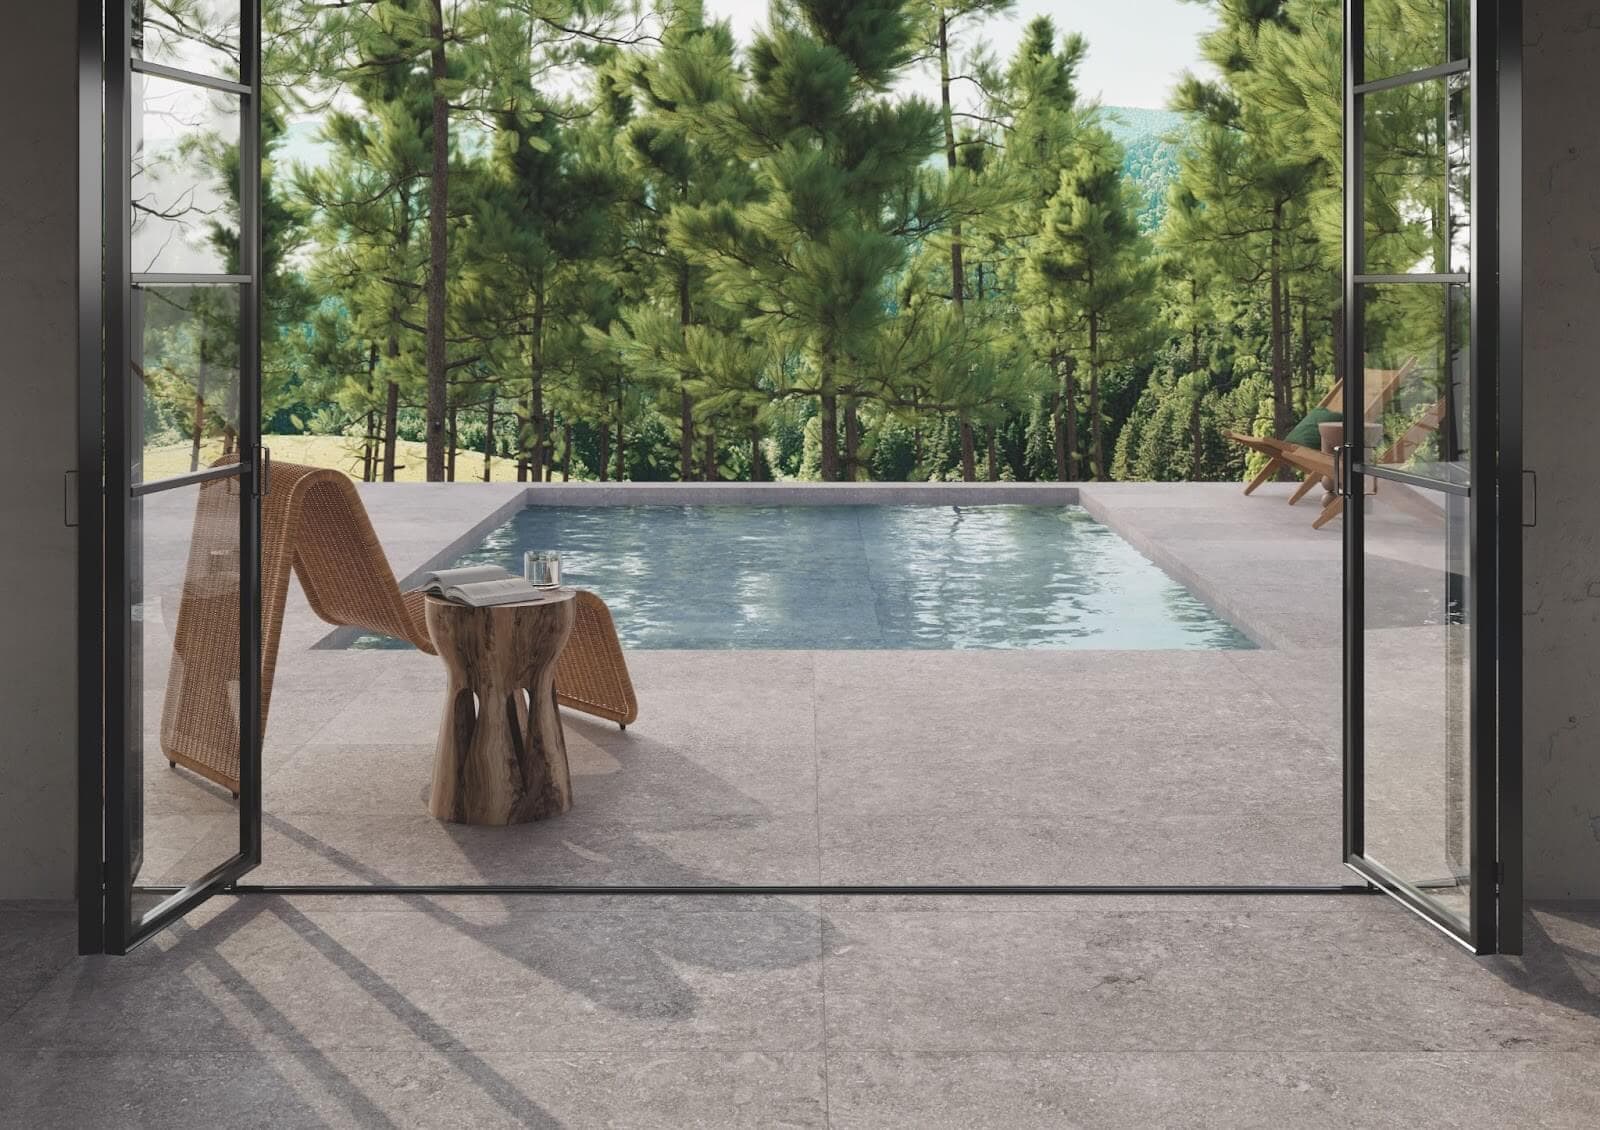 View of an outdoor residential pool with a lounge chair and side table beside it, surrounded by gray stone look tile with pine trees in the foreground.